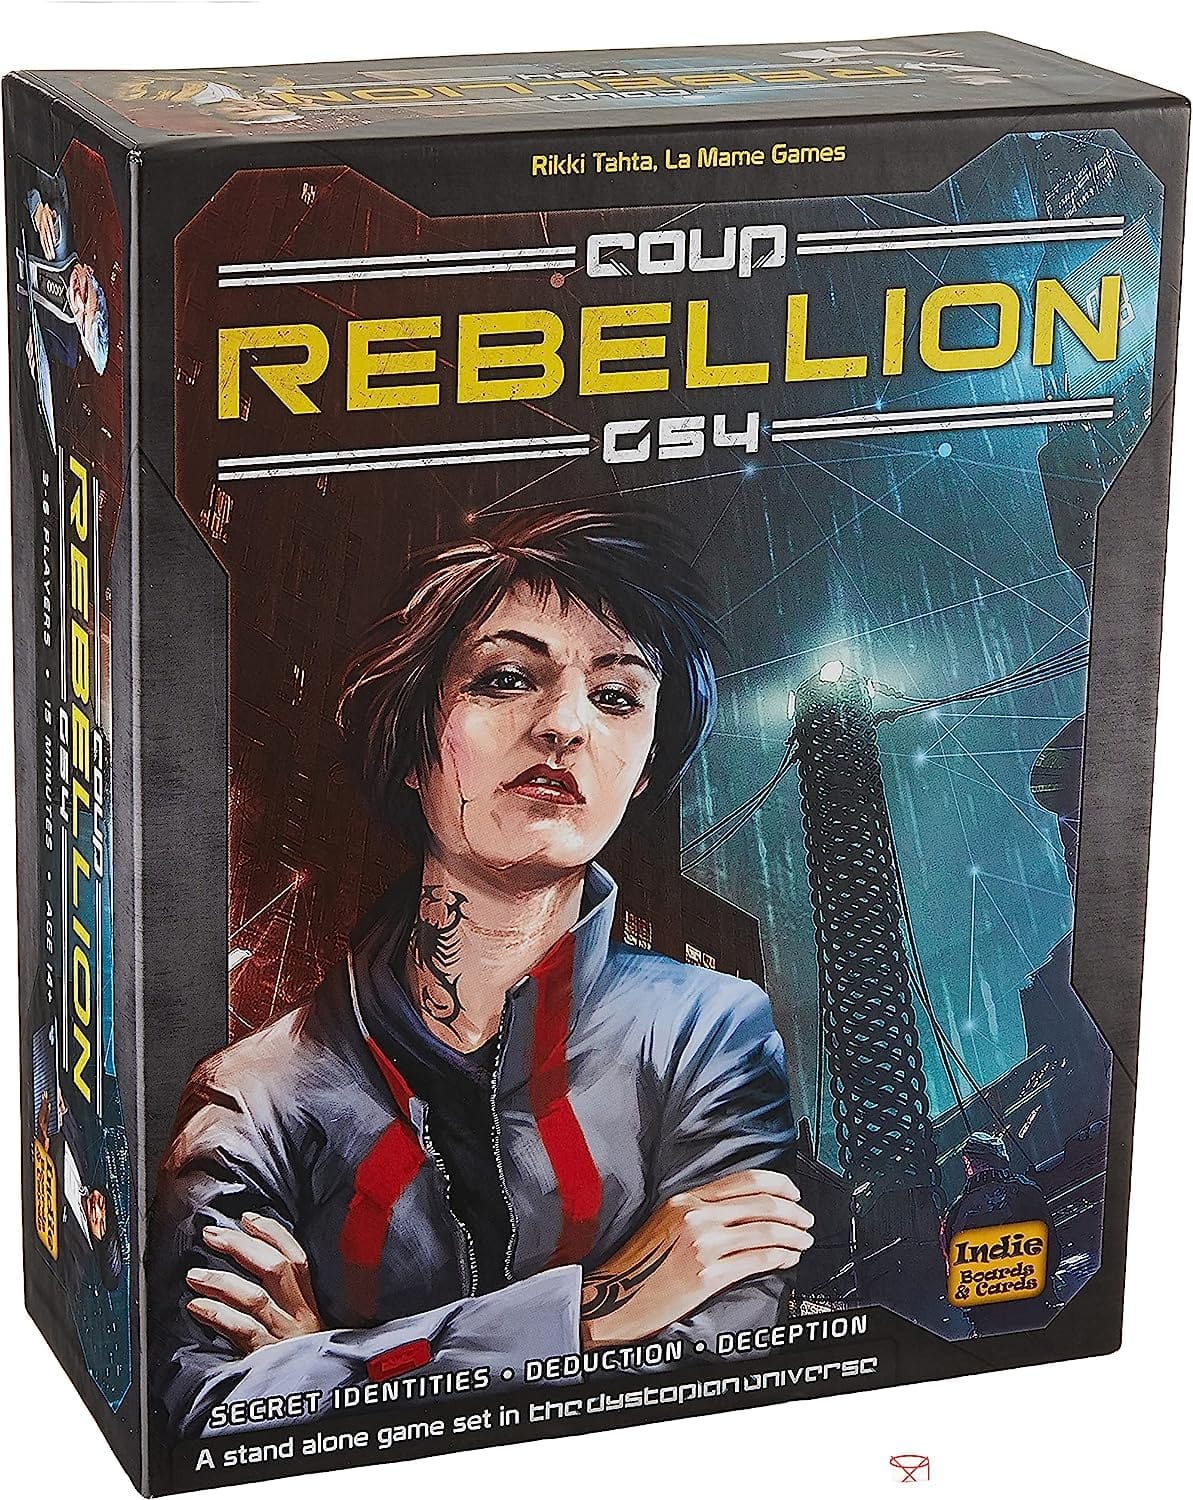 Indie Boards & Cards Coup: Rebellion G54 - Lost City Toys